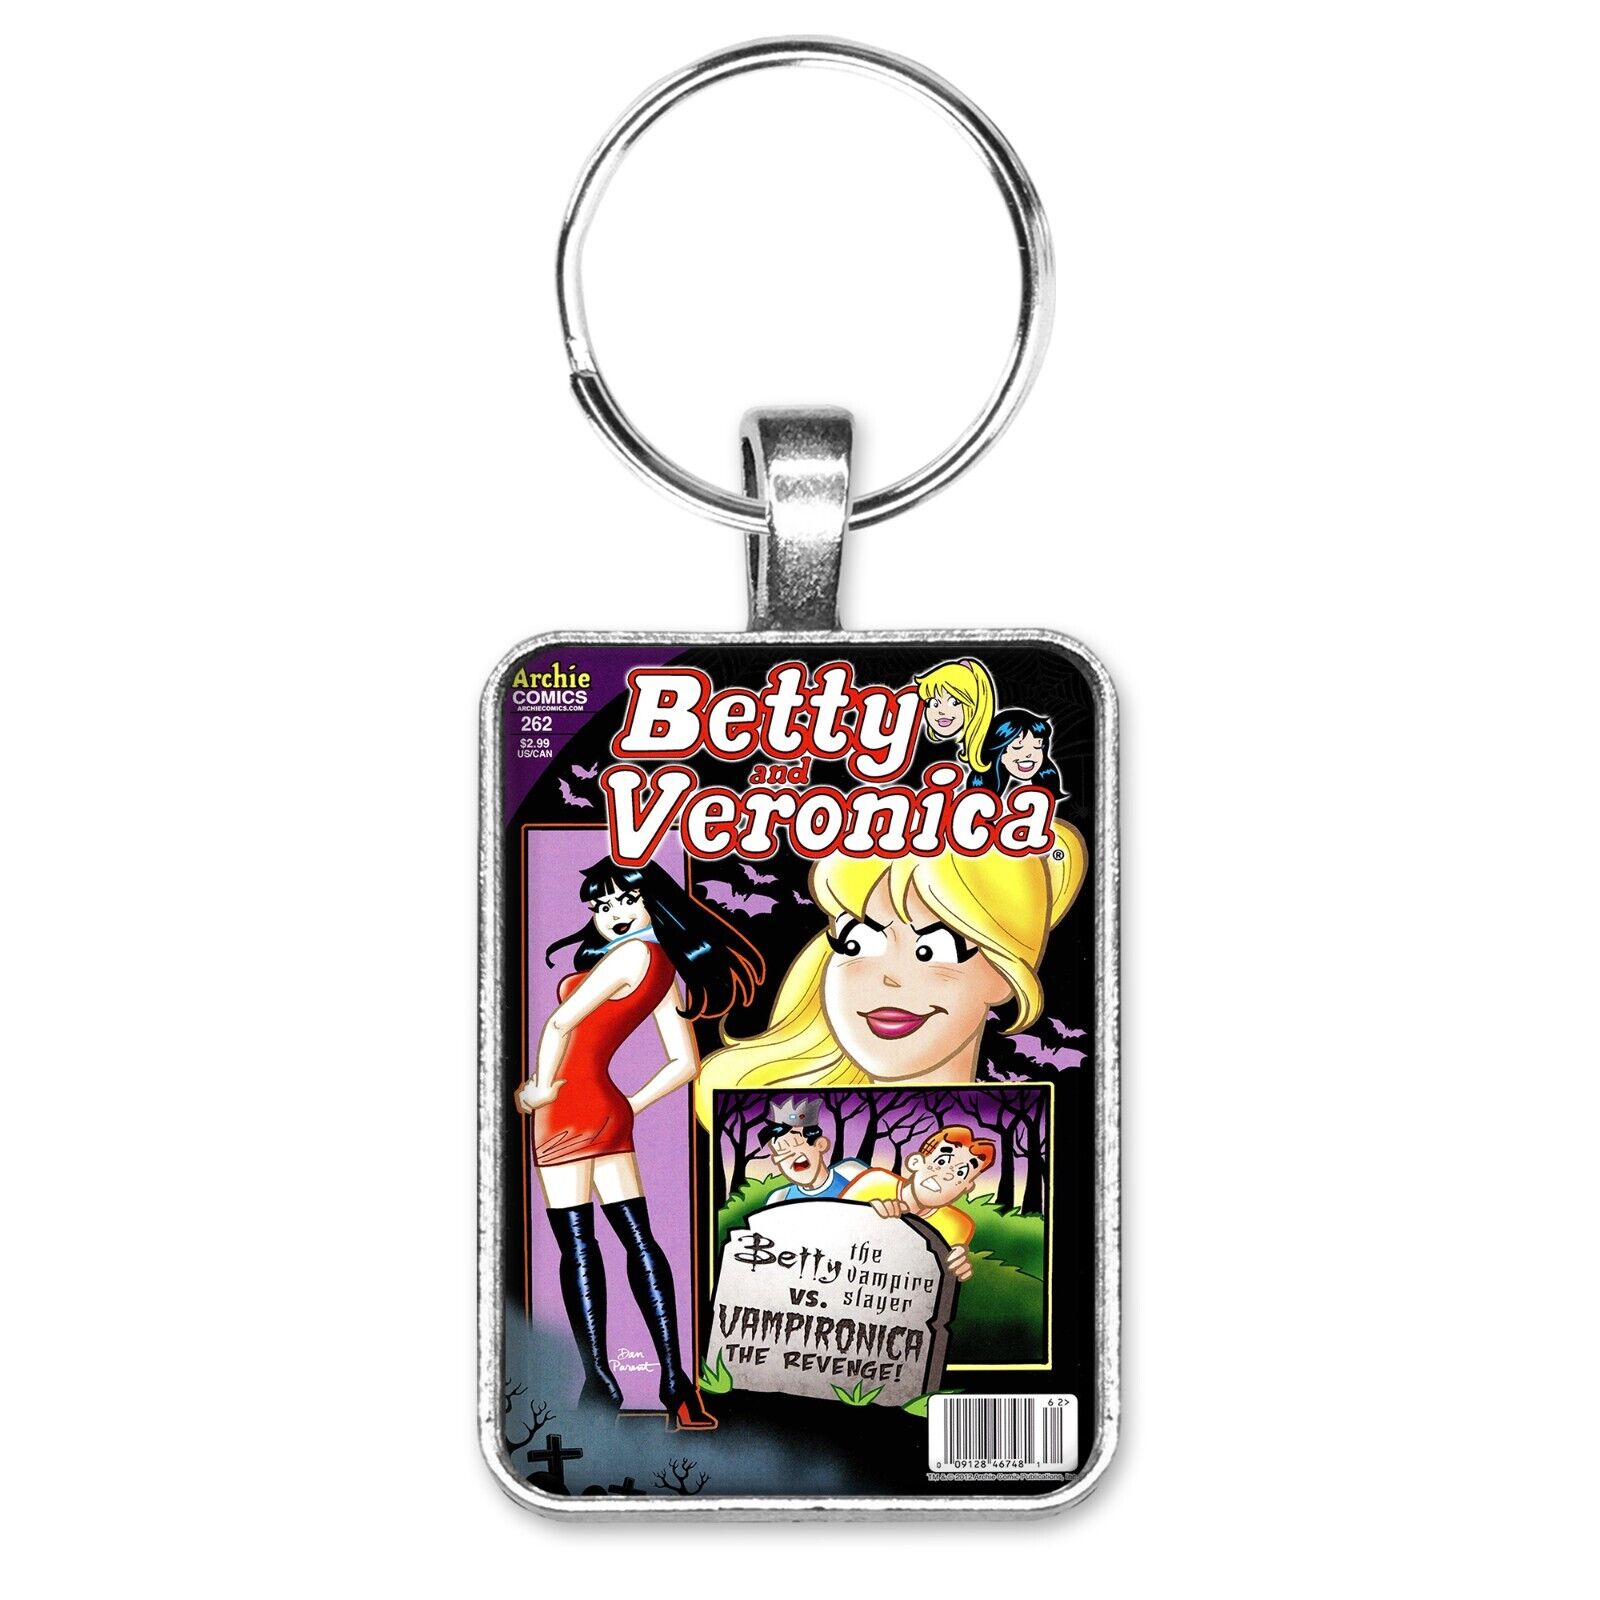 Betty and Veronica #262 Cover Key Ring or Necklace VAMPERONICA Archie Comic Book